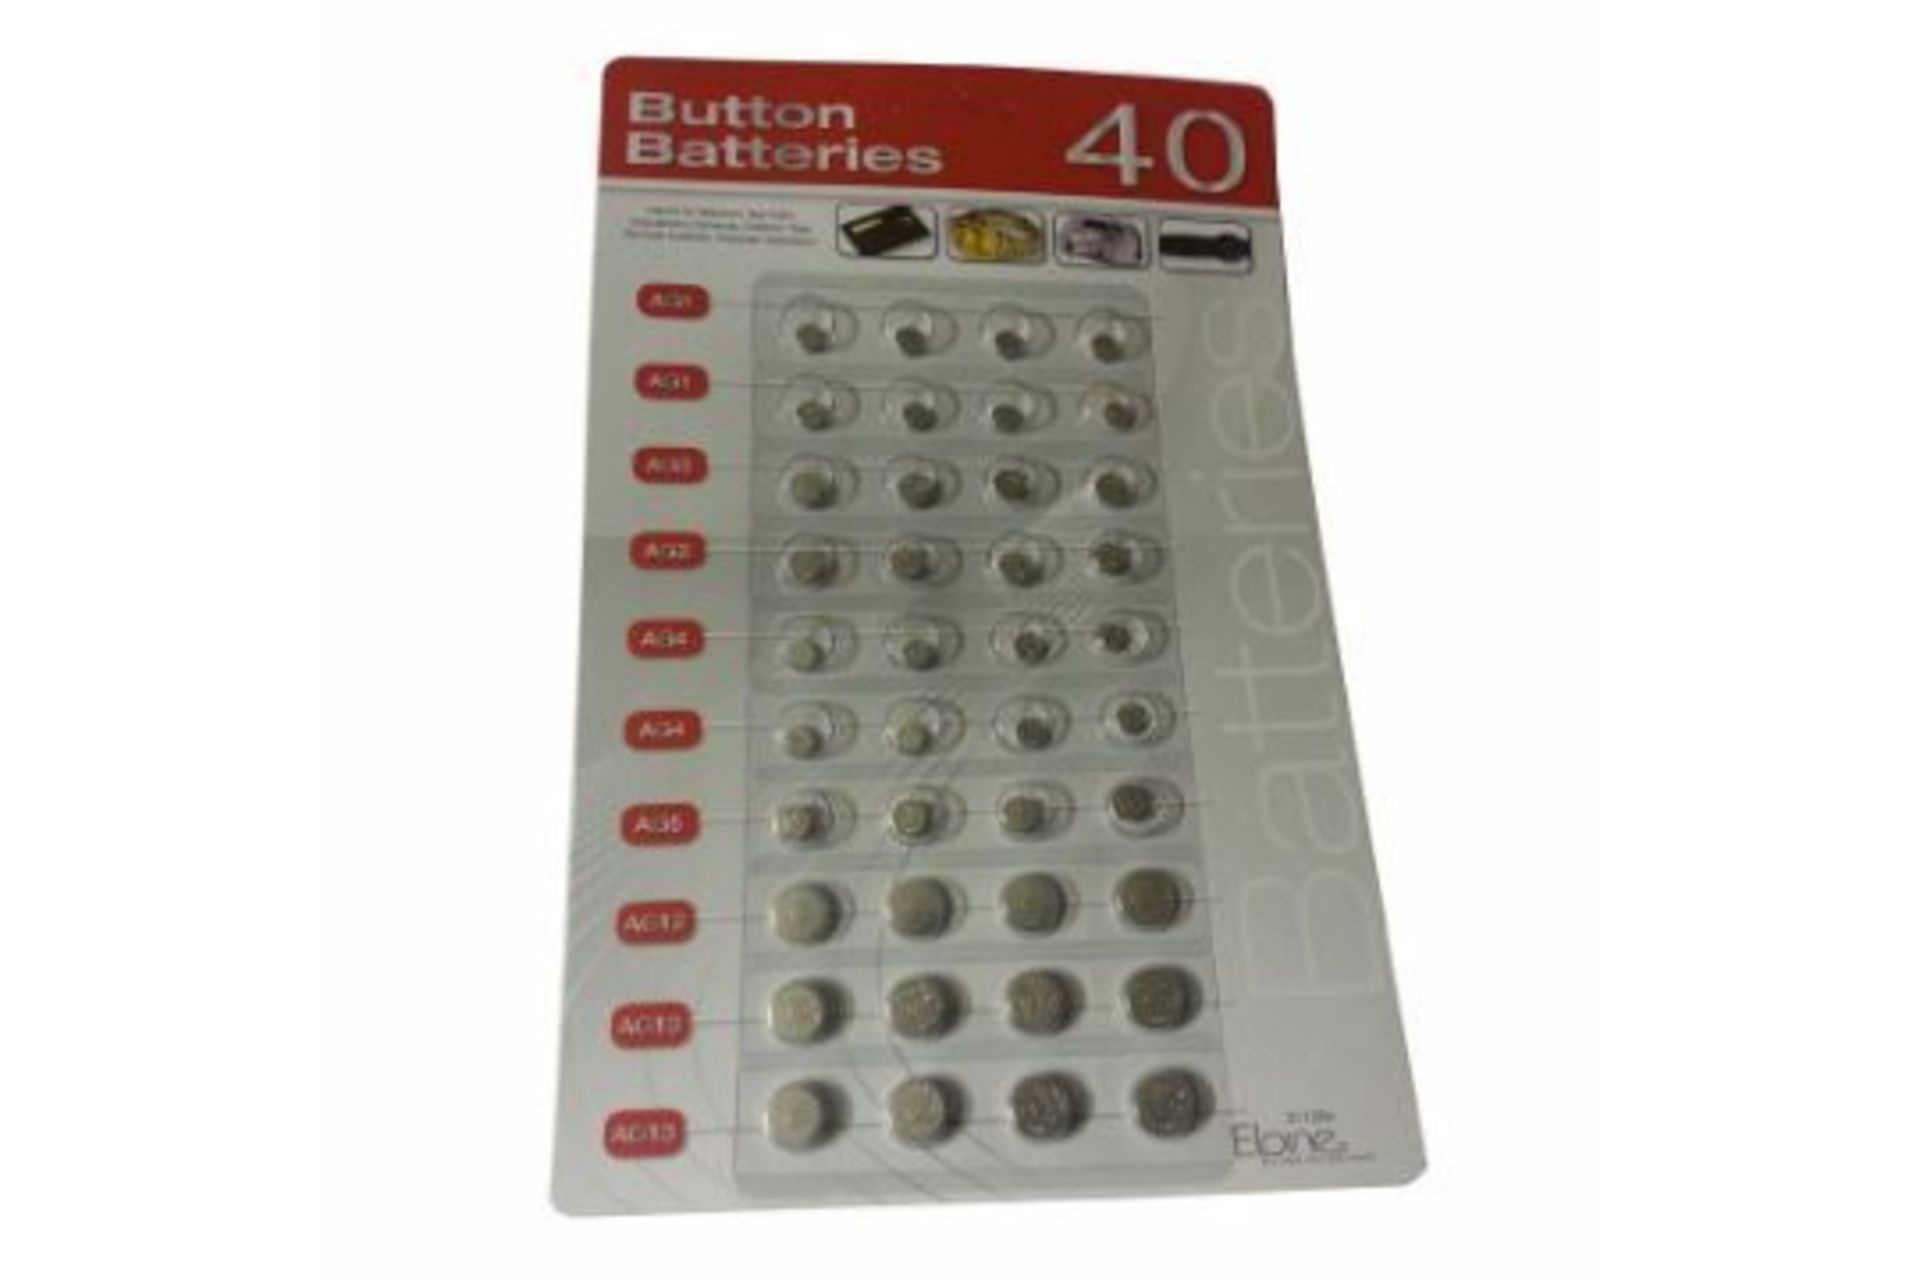 PACK OF 40 BUTTON BATTERIES, VARIOUS SIZES